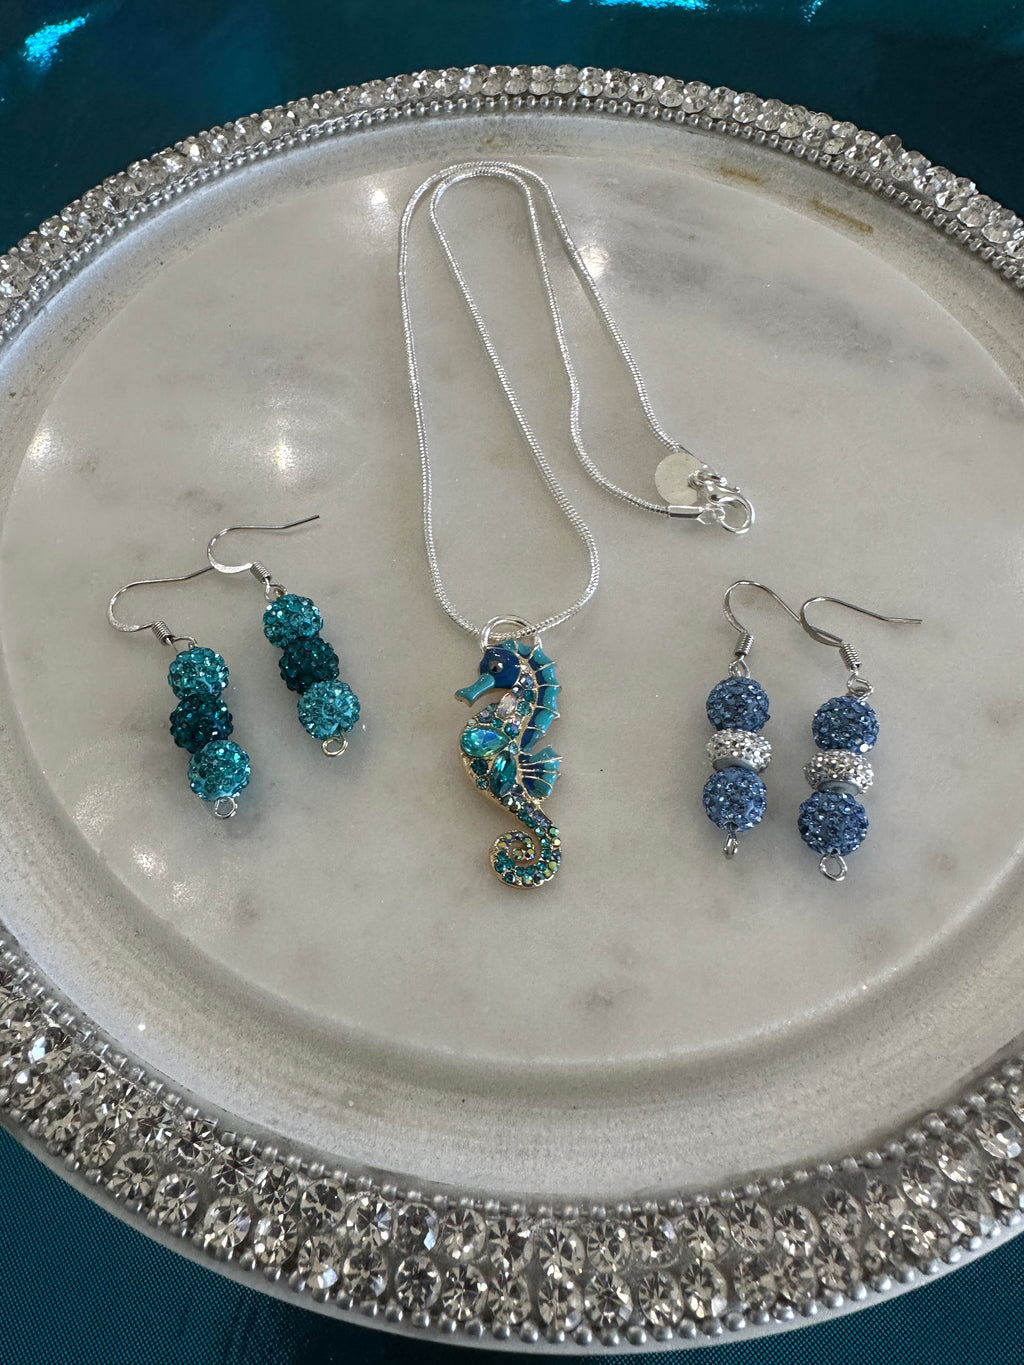 Rhinestone Seahorse Pendent w/ Two Beaded Earring Choices